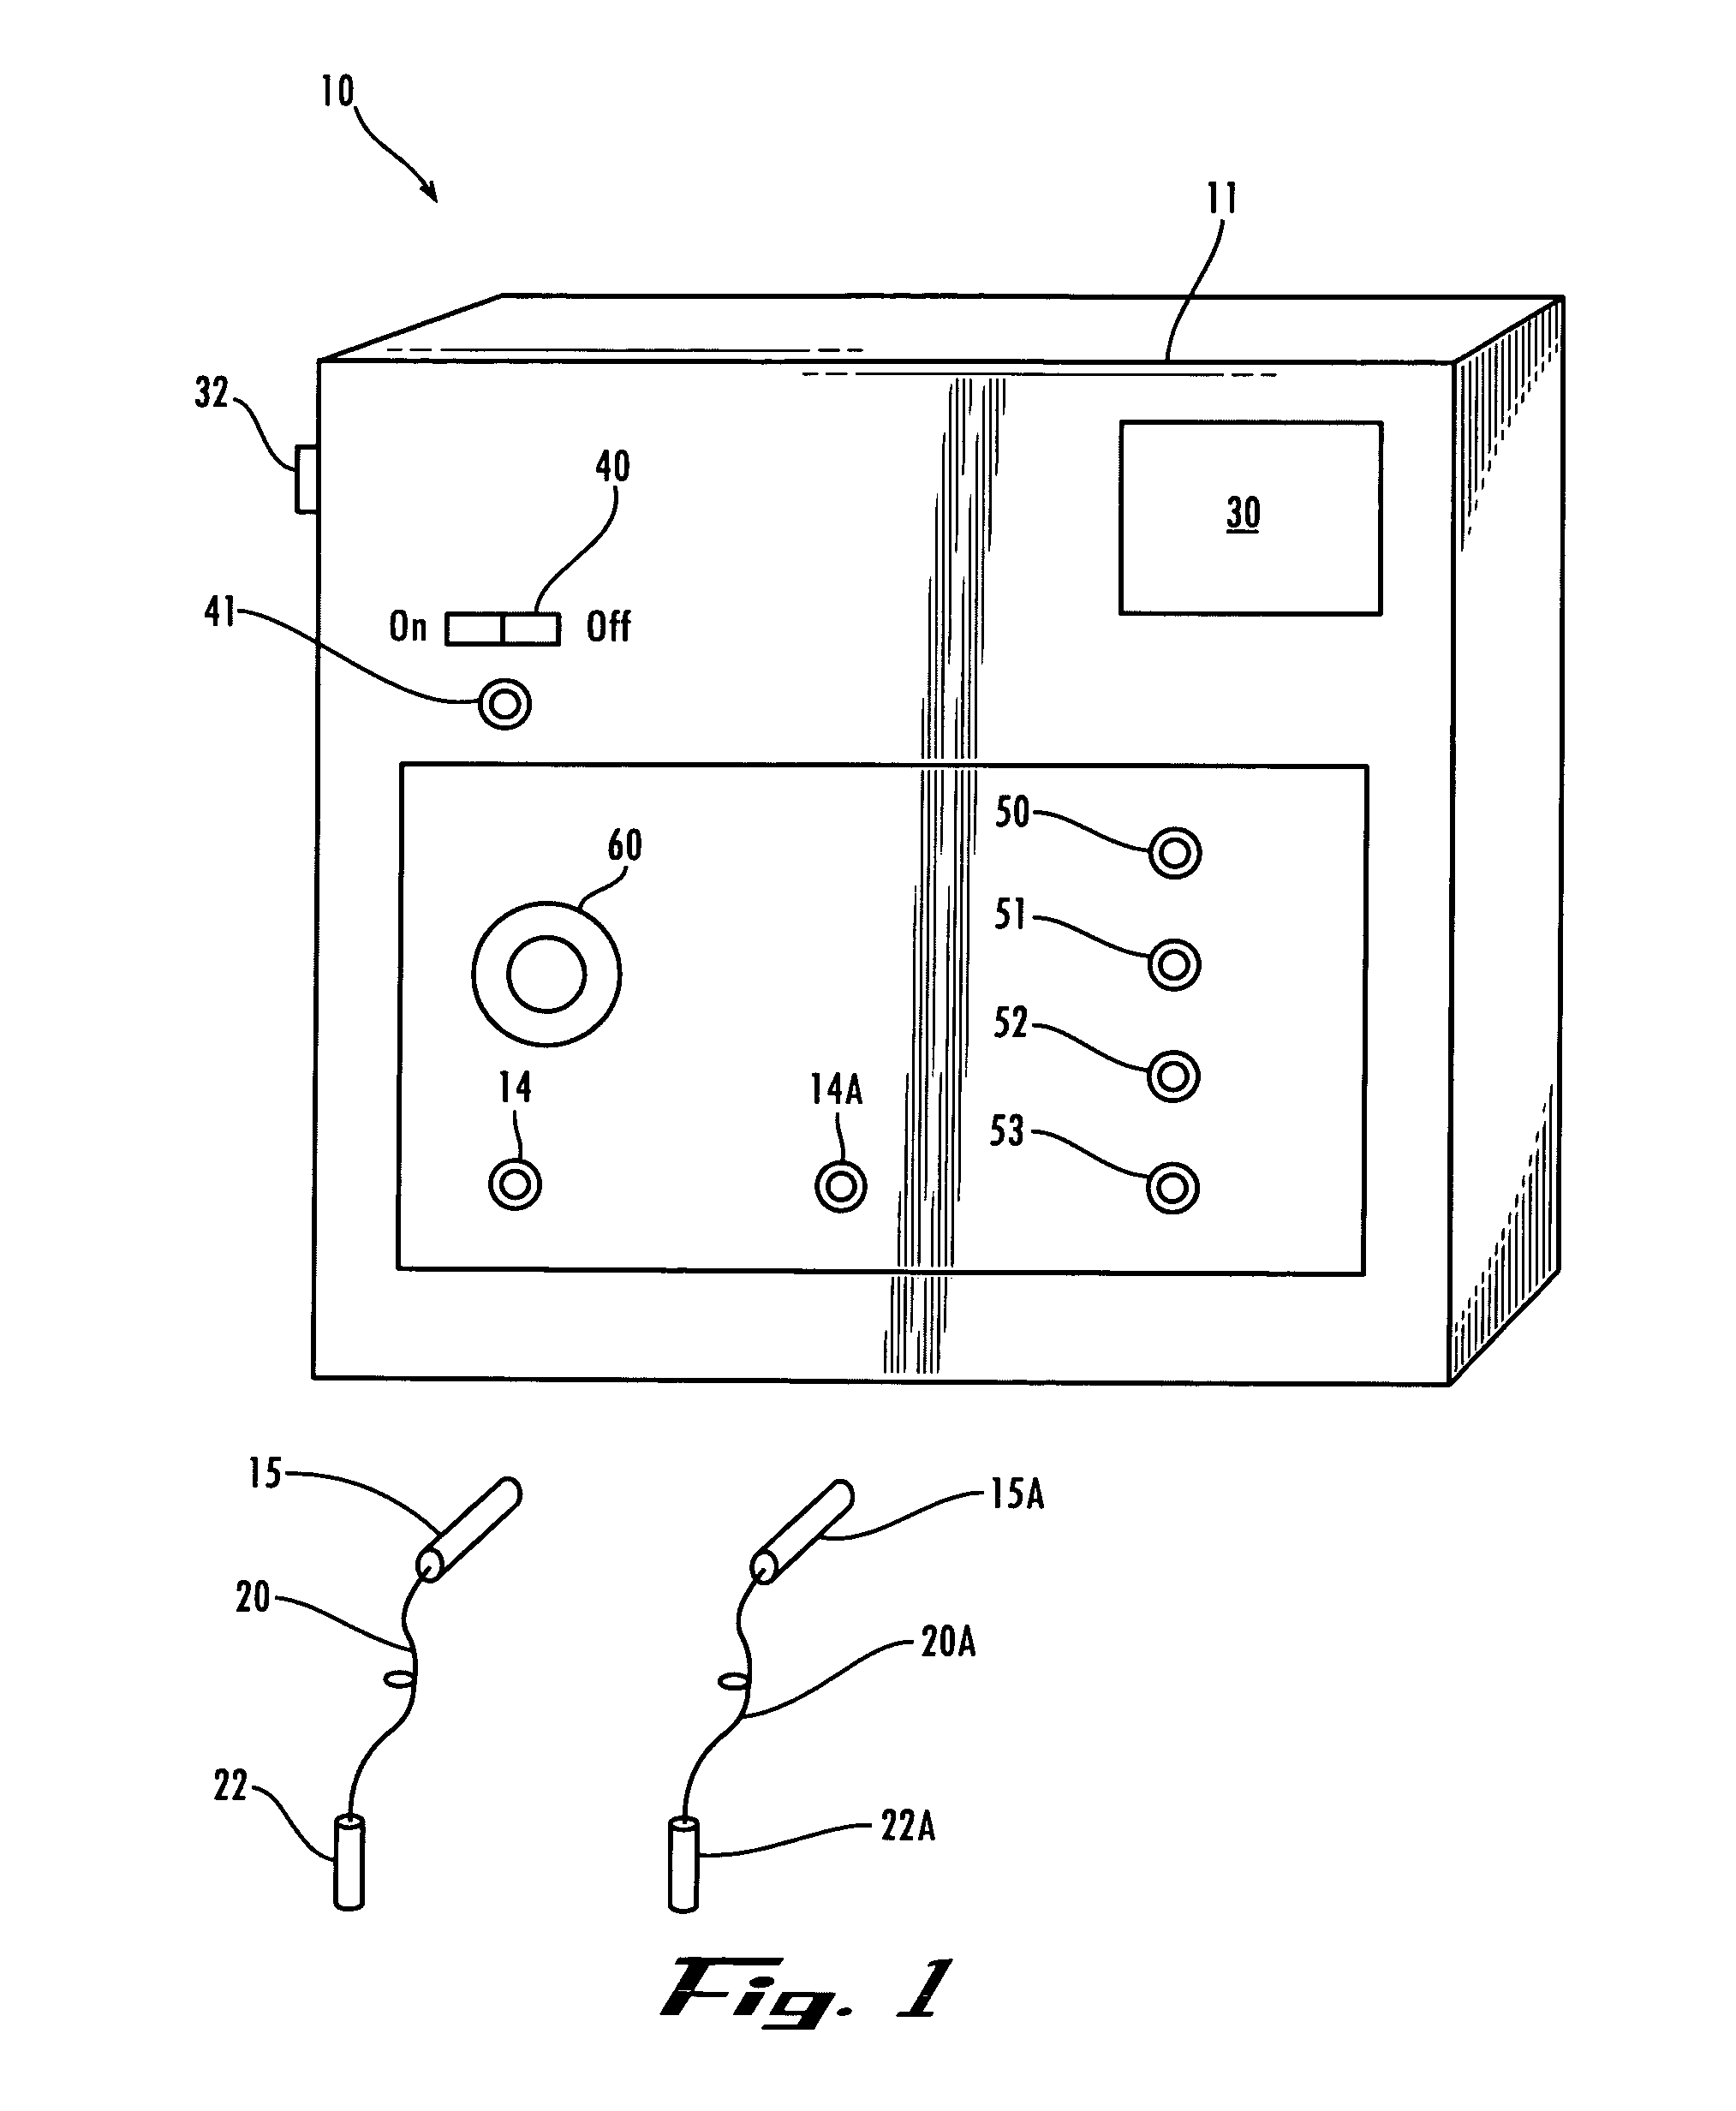 Method and apparatus for performing microcurrent stimulation (MSC) therapy